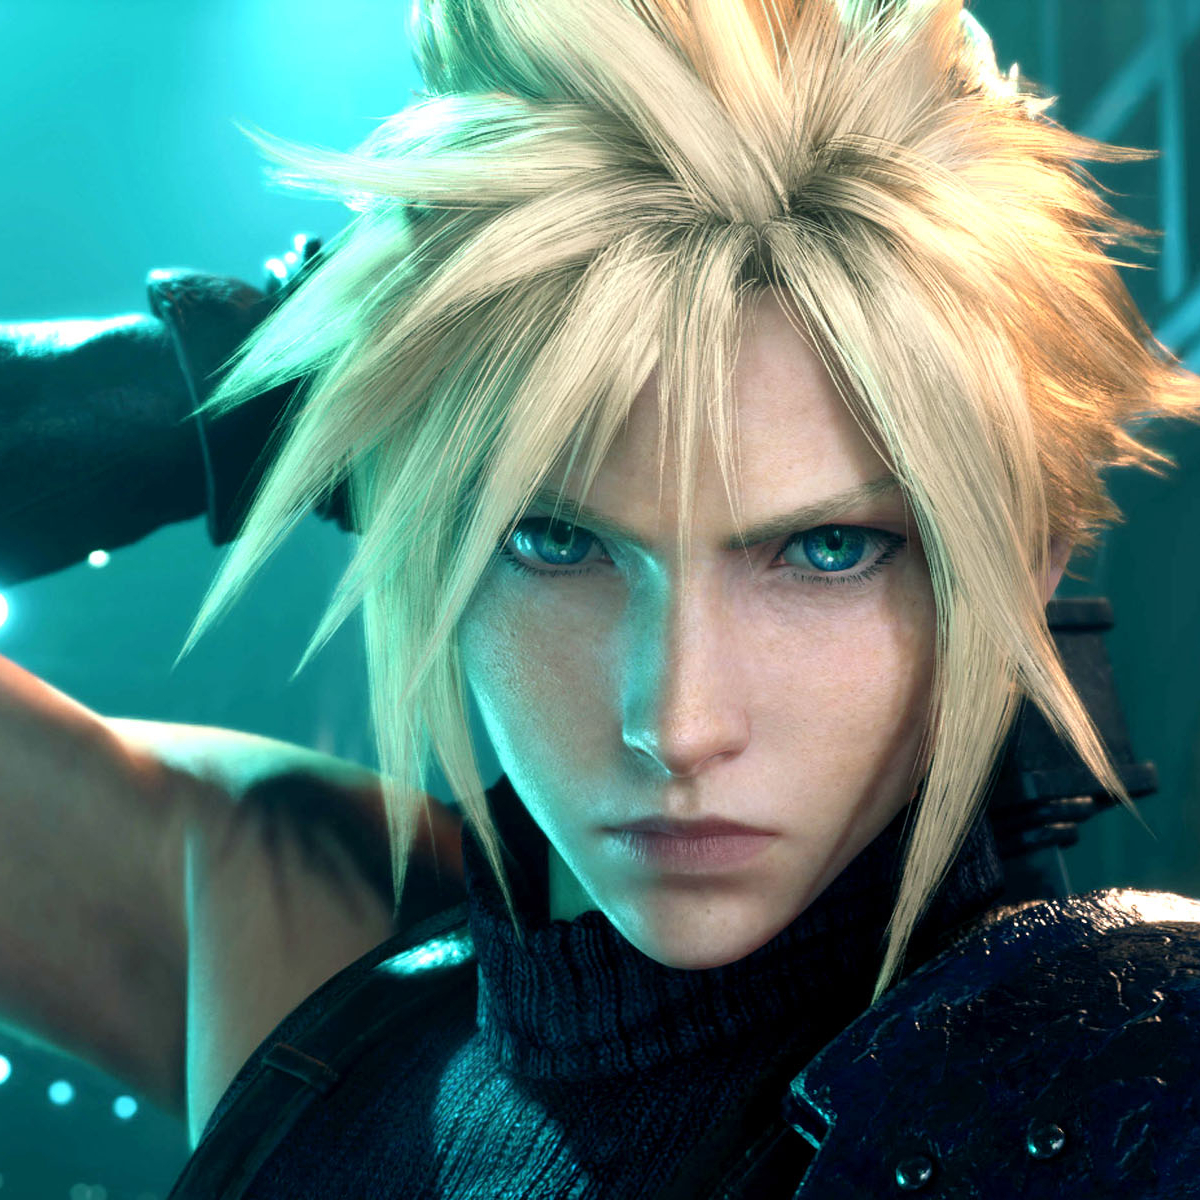 Final Fantasy 7 Remake on PC is a disappointing, barebones port